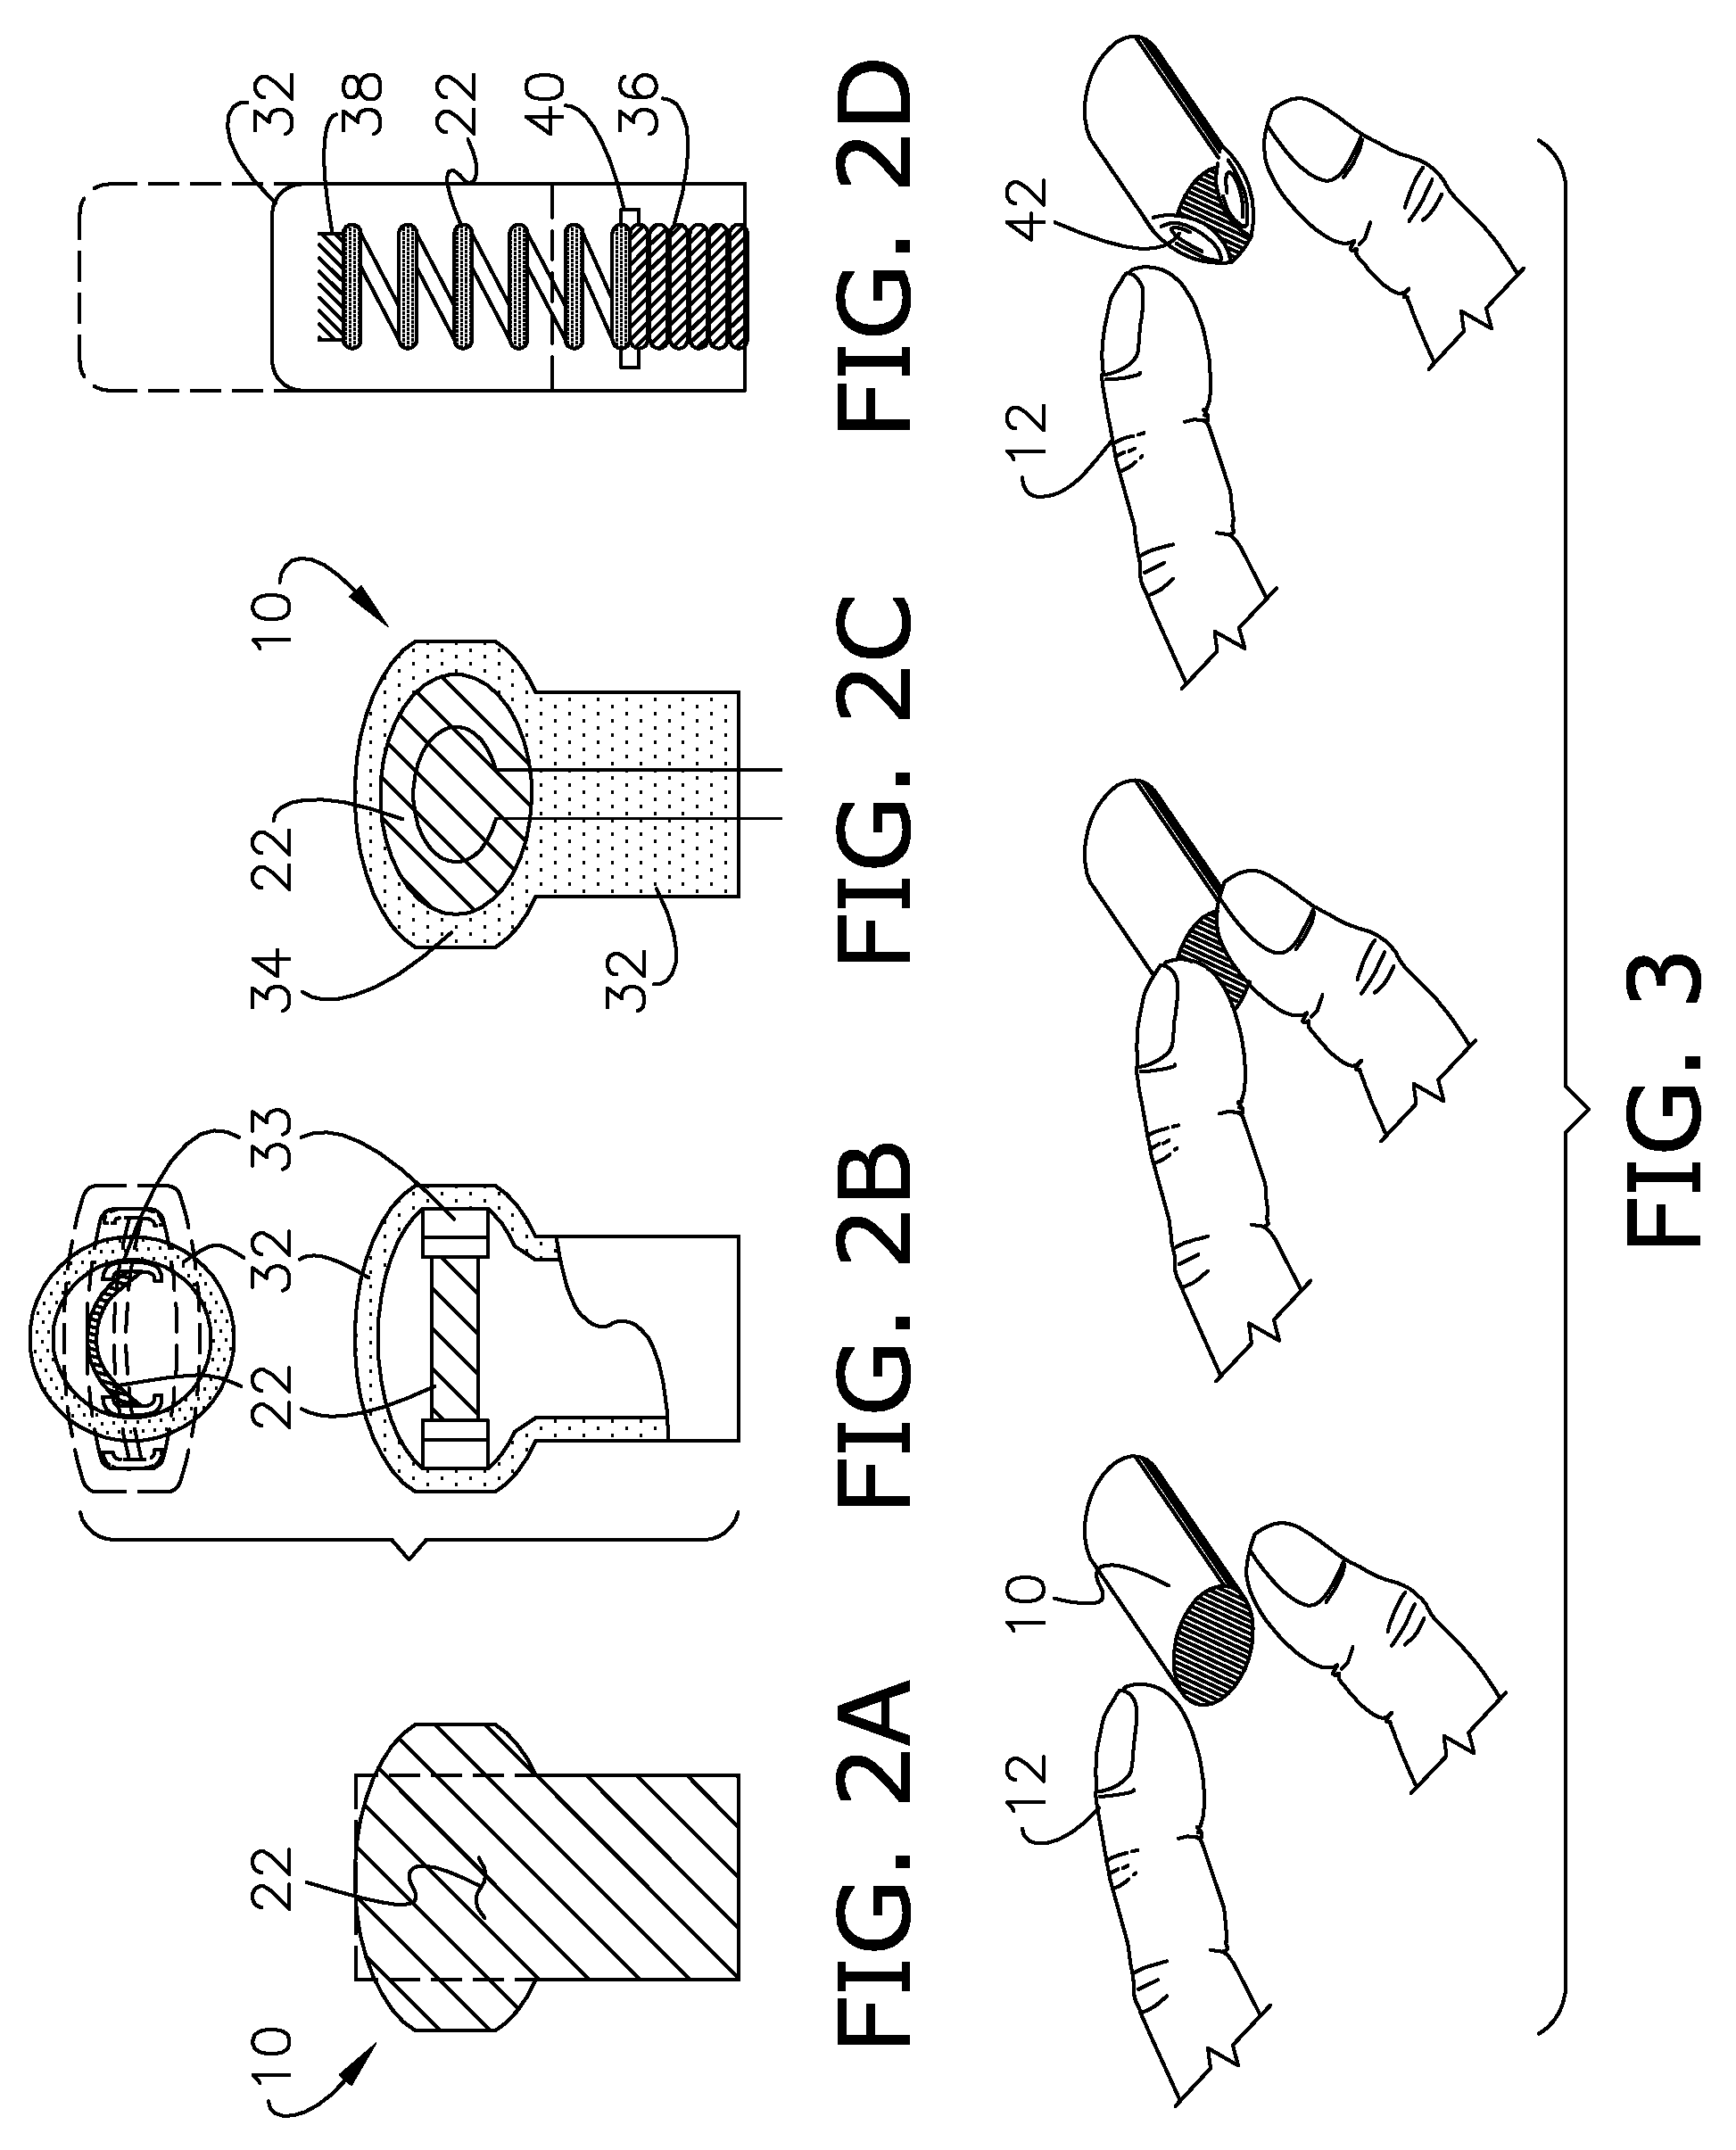 Reconfigurable tactile interface utilizing active material actuation